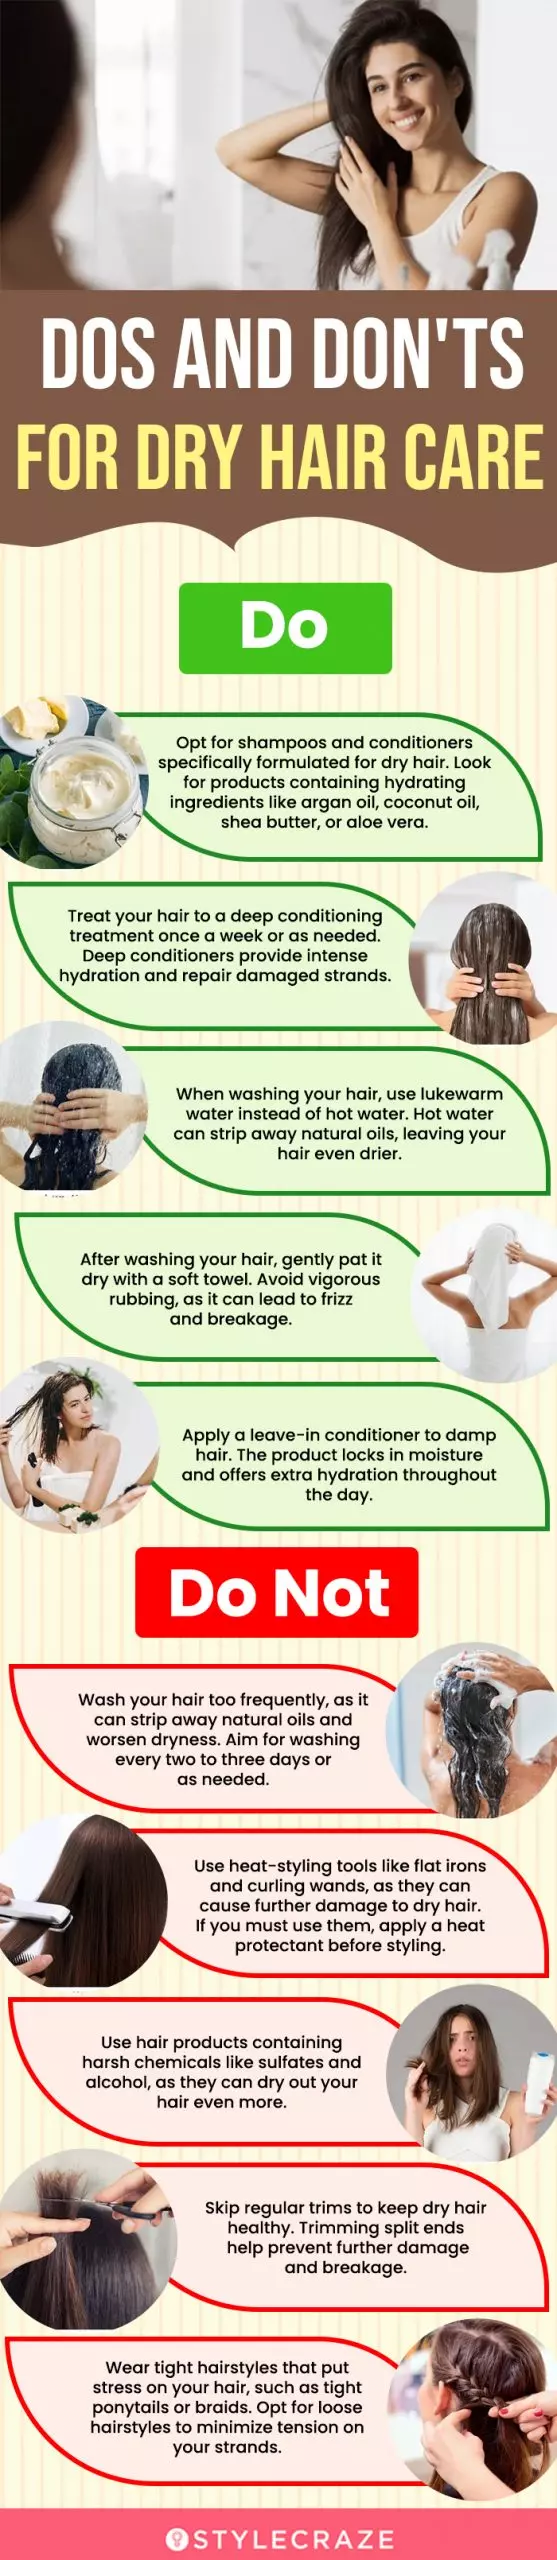 Dos And Don'ts For Dry Hair Care (infographic)